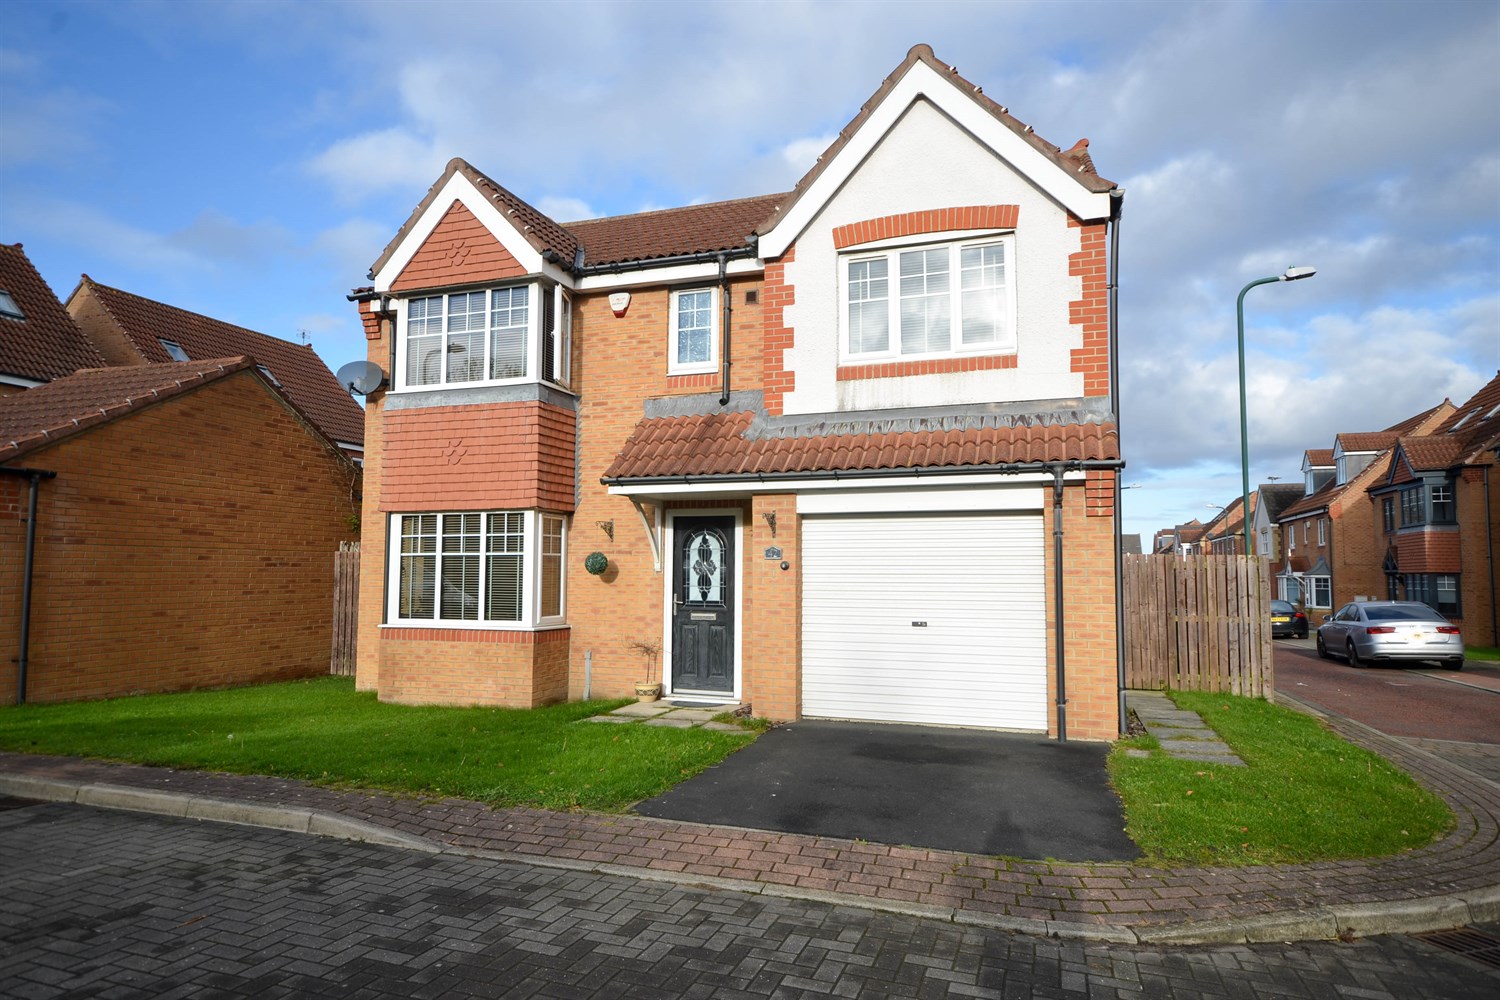 5 bed detached house for sale in Strathmore Gardens, South Shields - Property Image 1